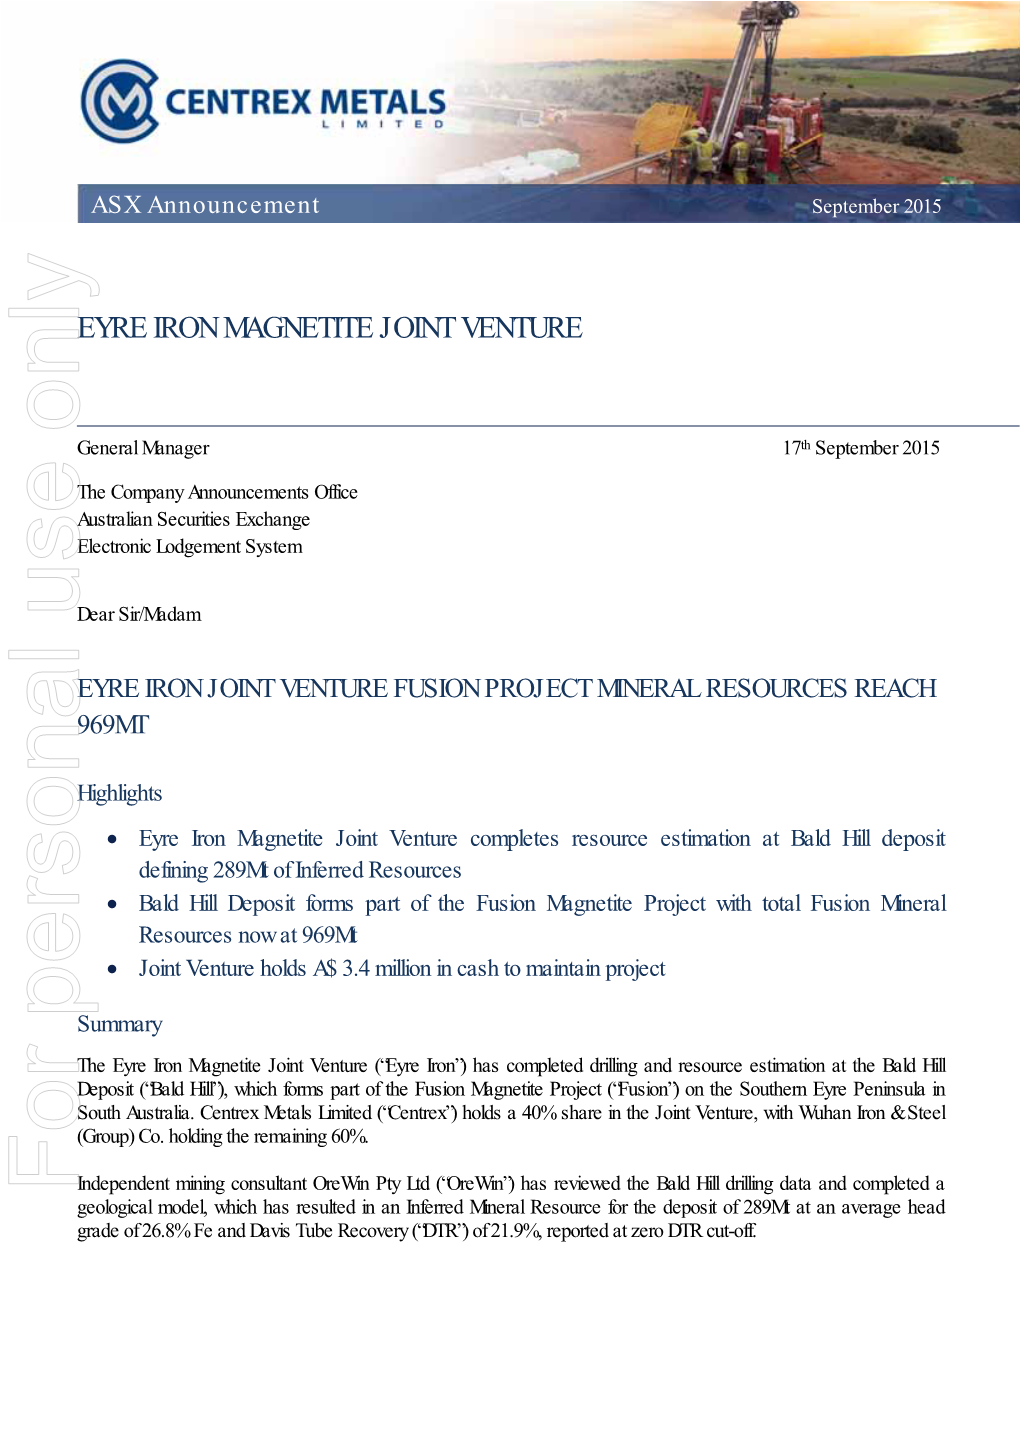 Eyre Iron Magnetite Joint Venture